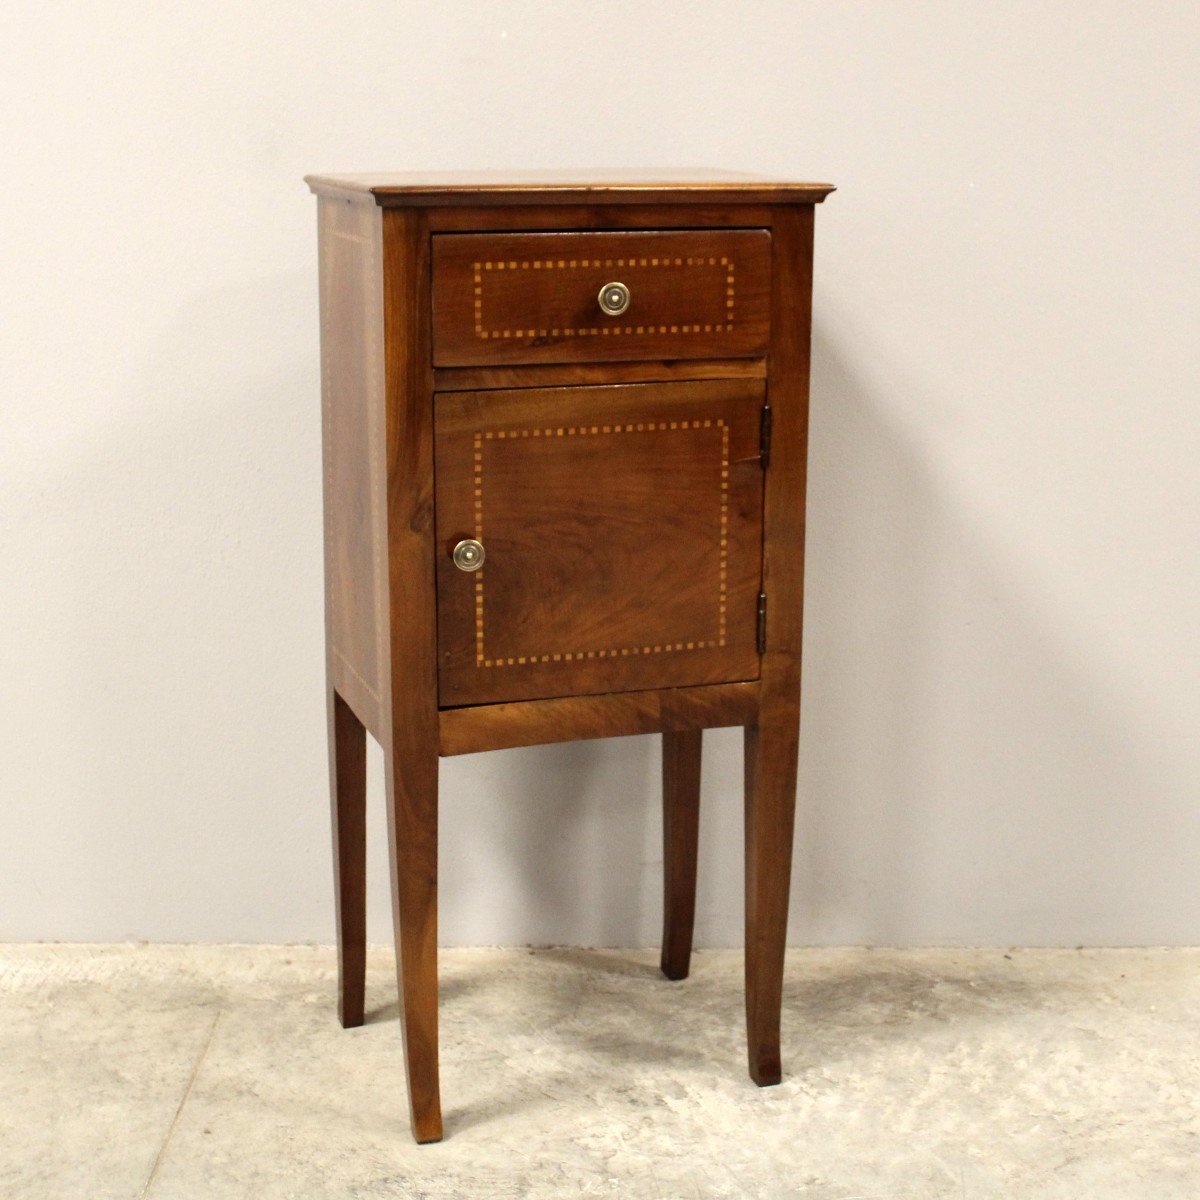 Antique Directoire Bedside Nightstand Table In Walnut And Marquetry - Italy 19th